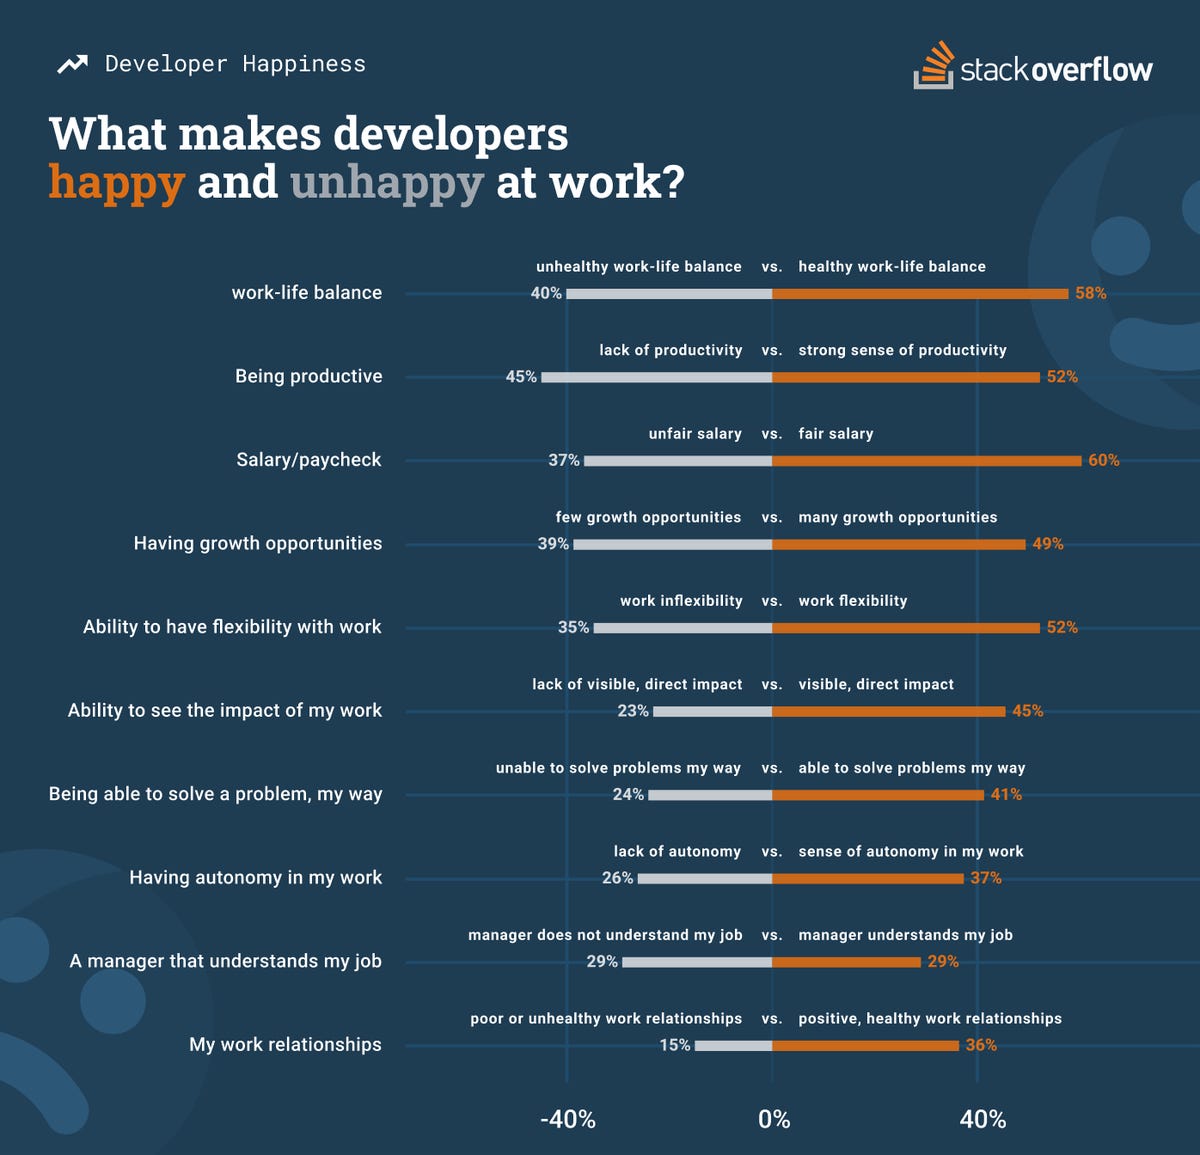 developer-happiness-blog-03-why-square.png